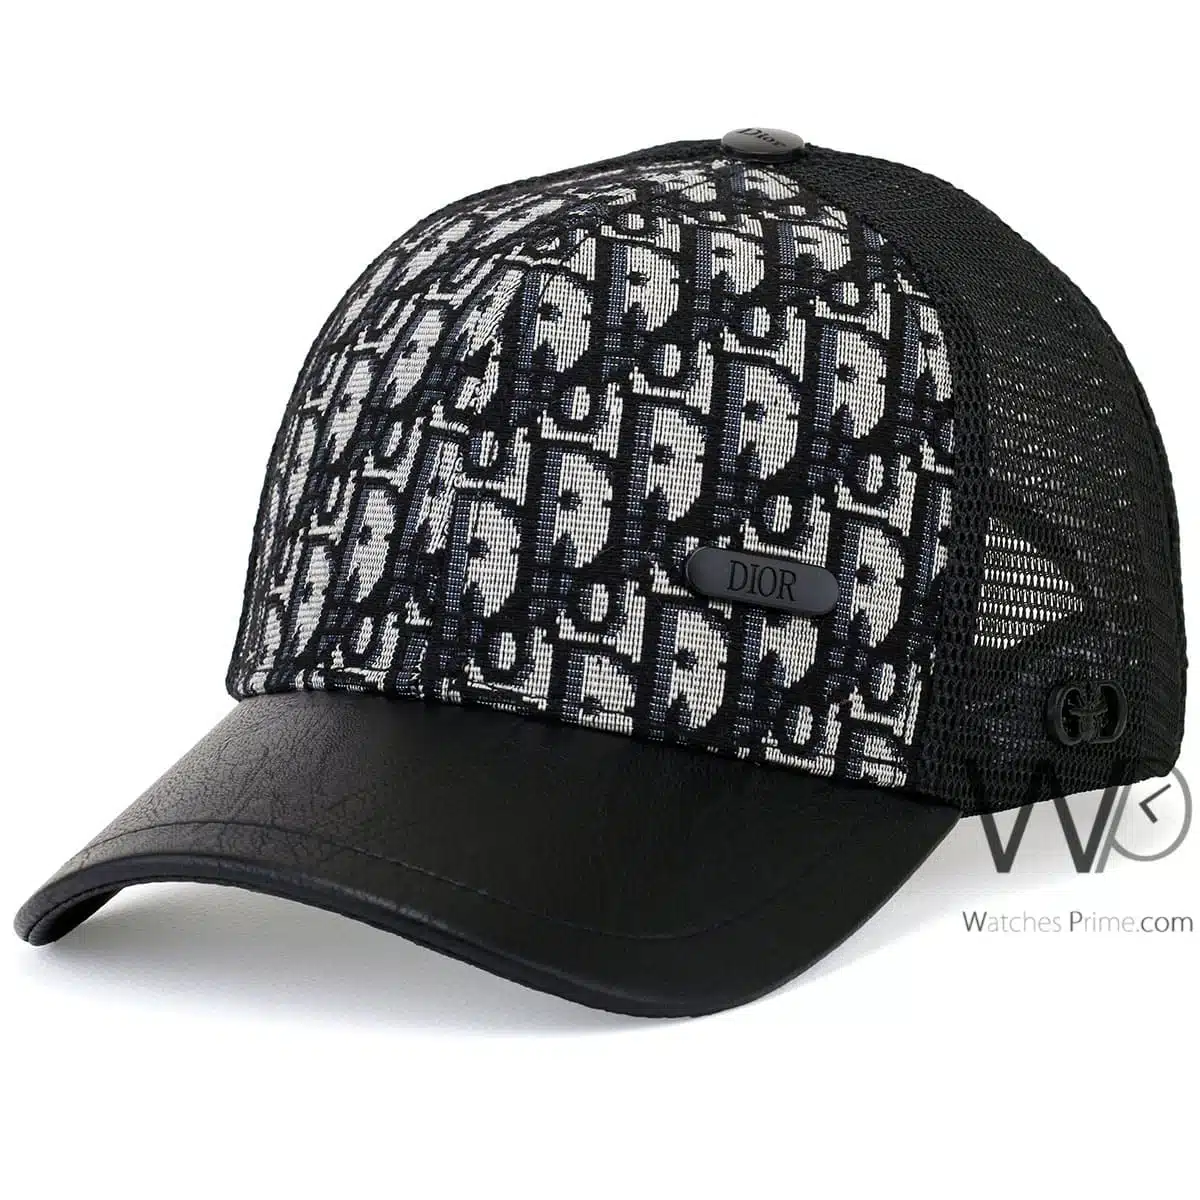 Patterned Christian Dior Trucker Black Cap | Watches Prime